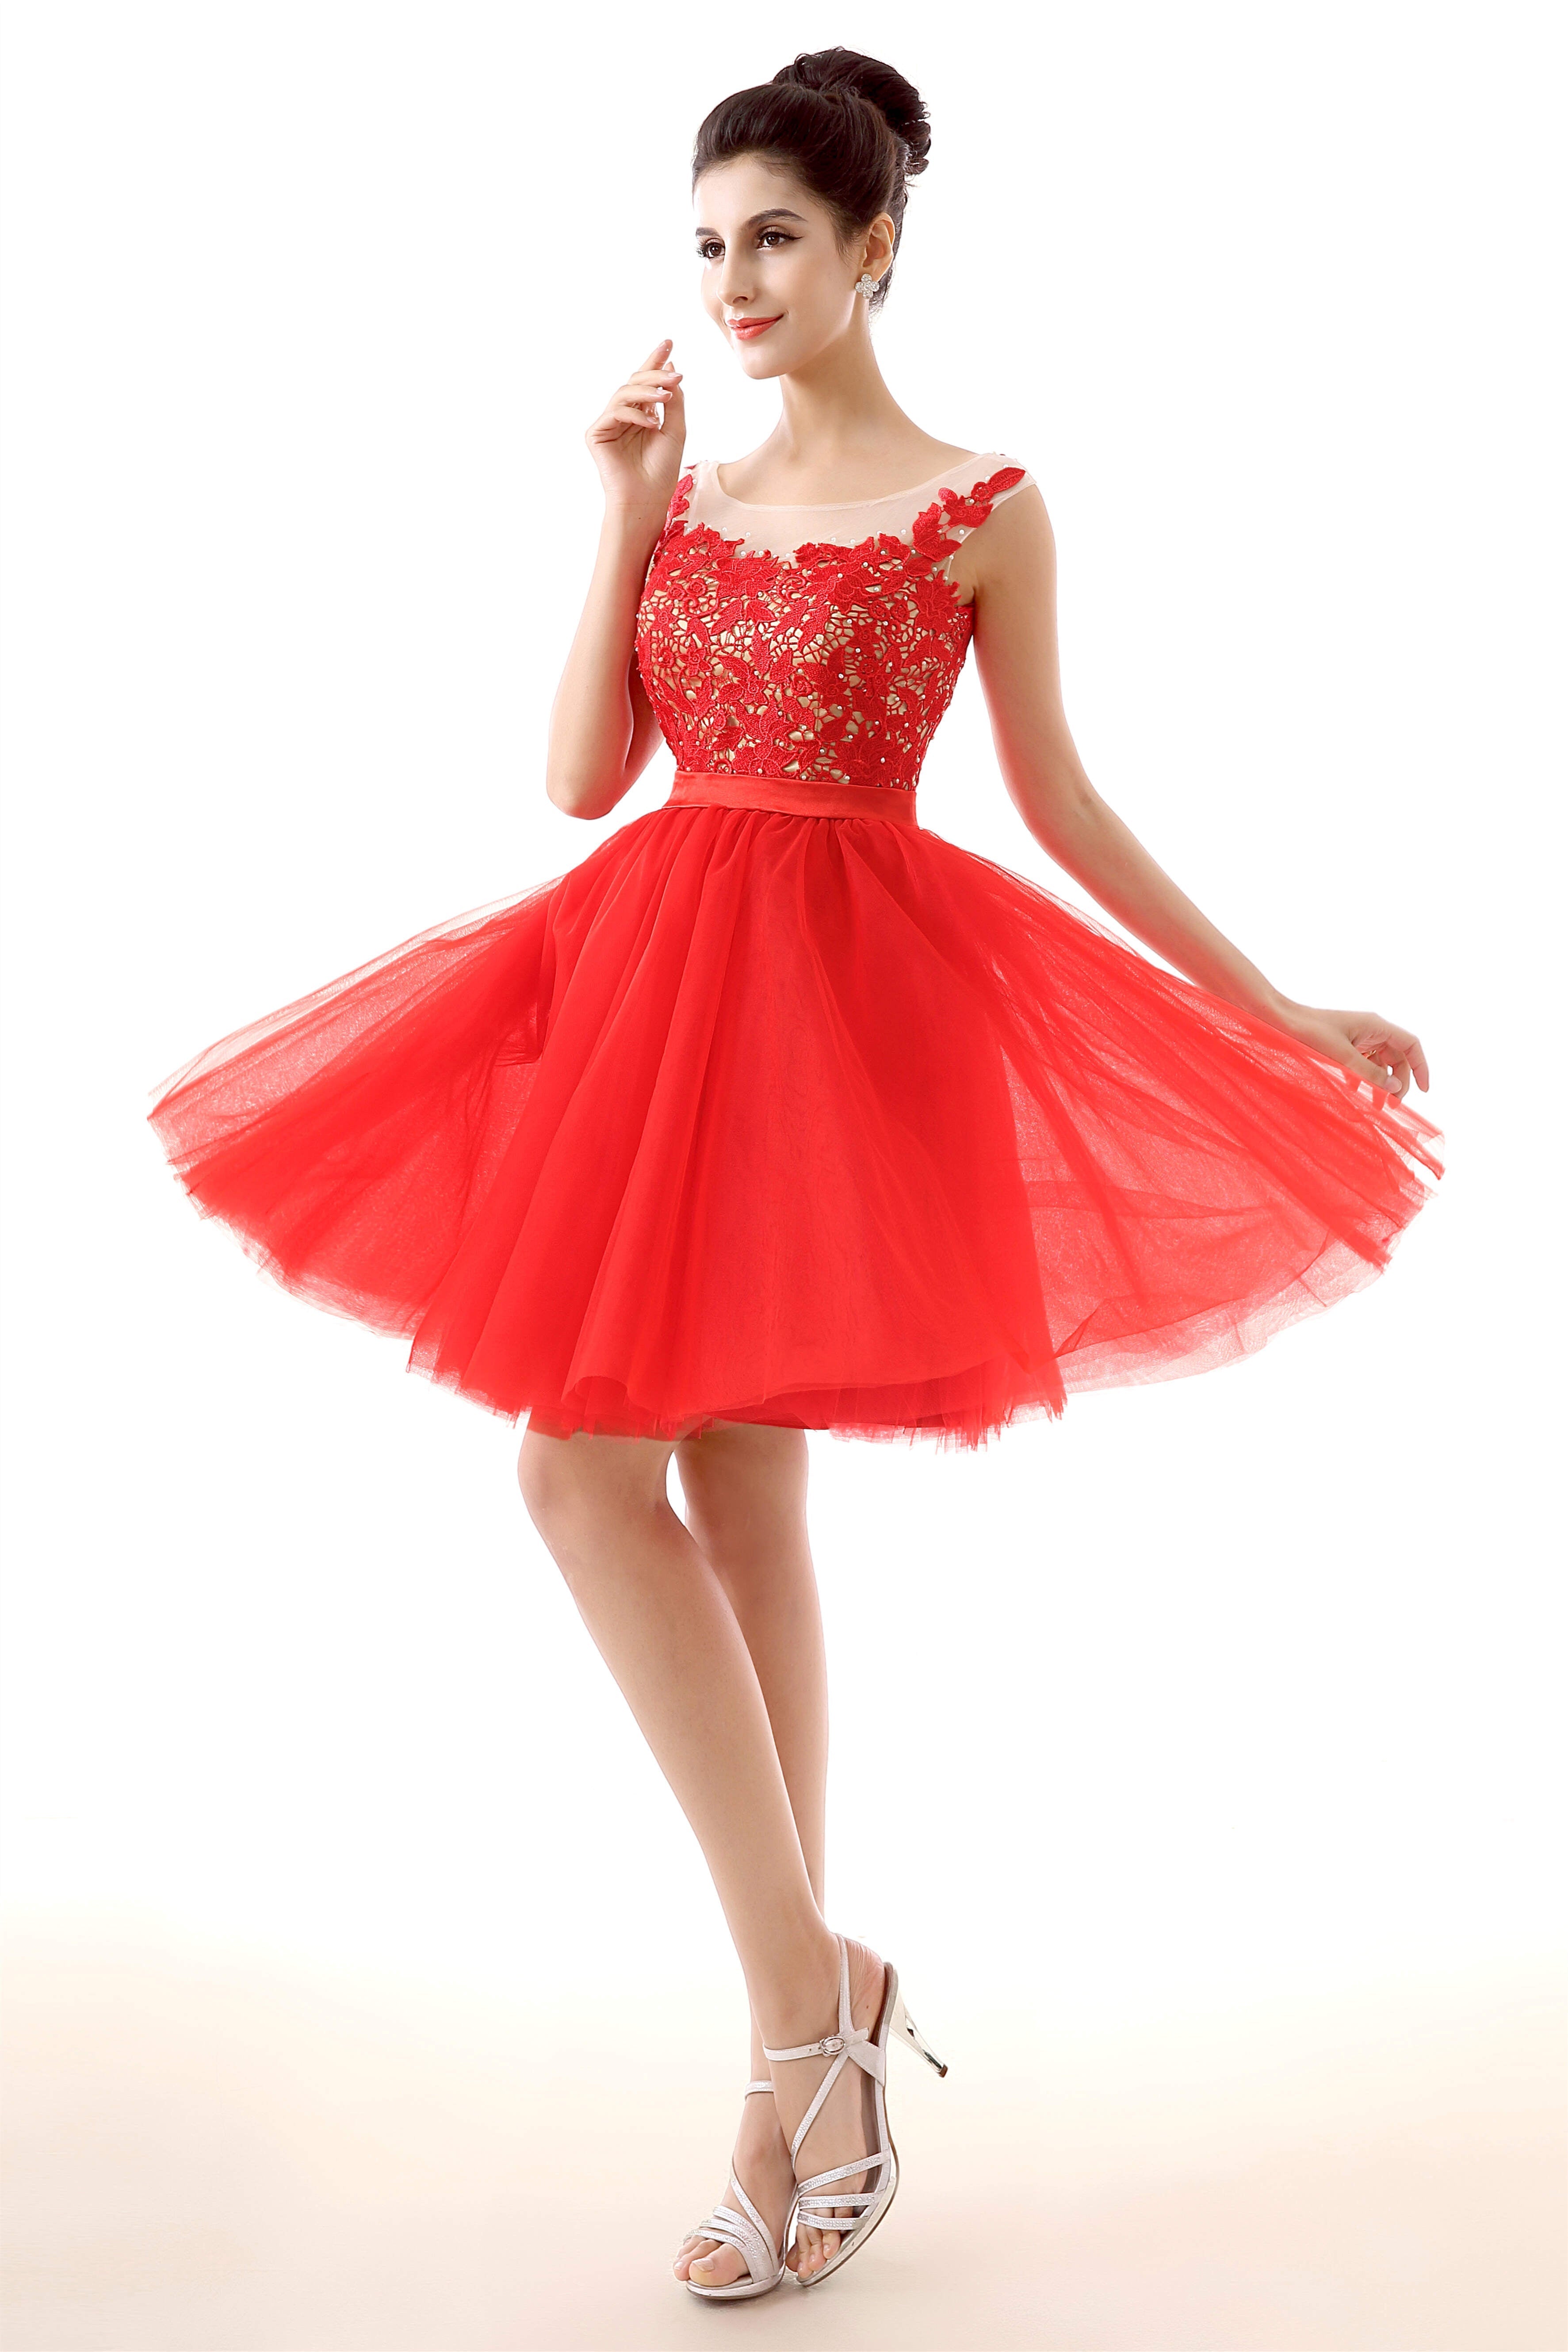 Party Dress With Sleeves, Lace Cute Red Short Homecoming Dresses